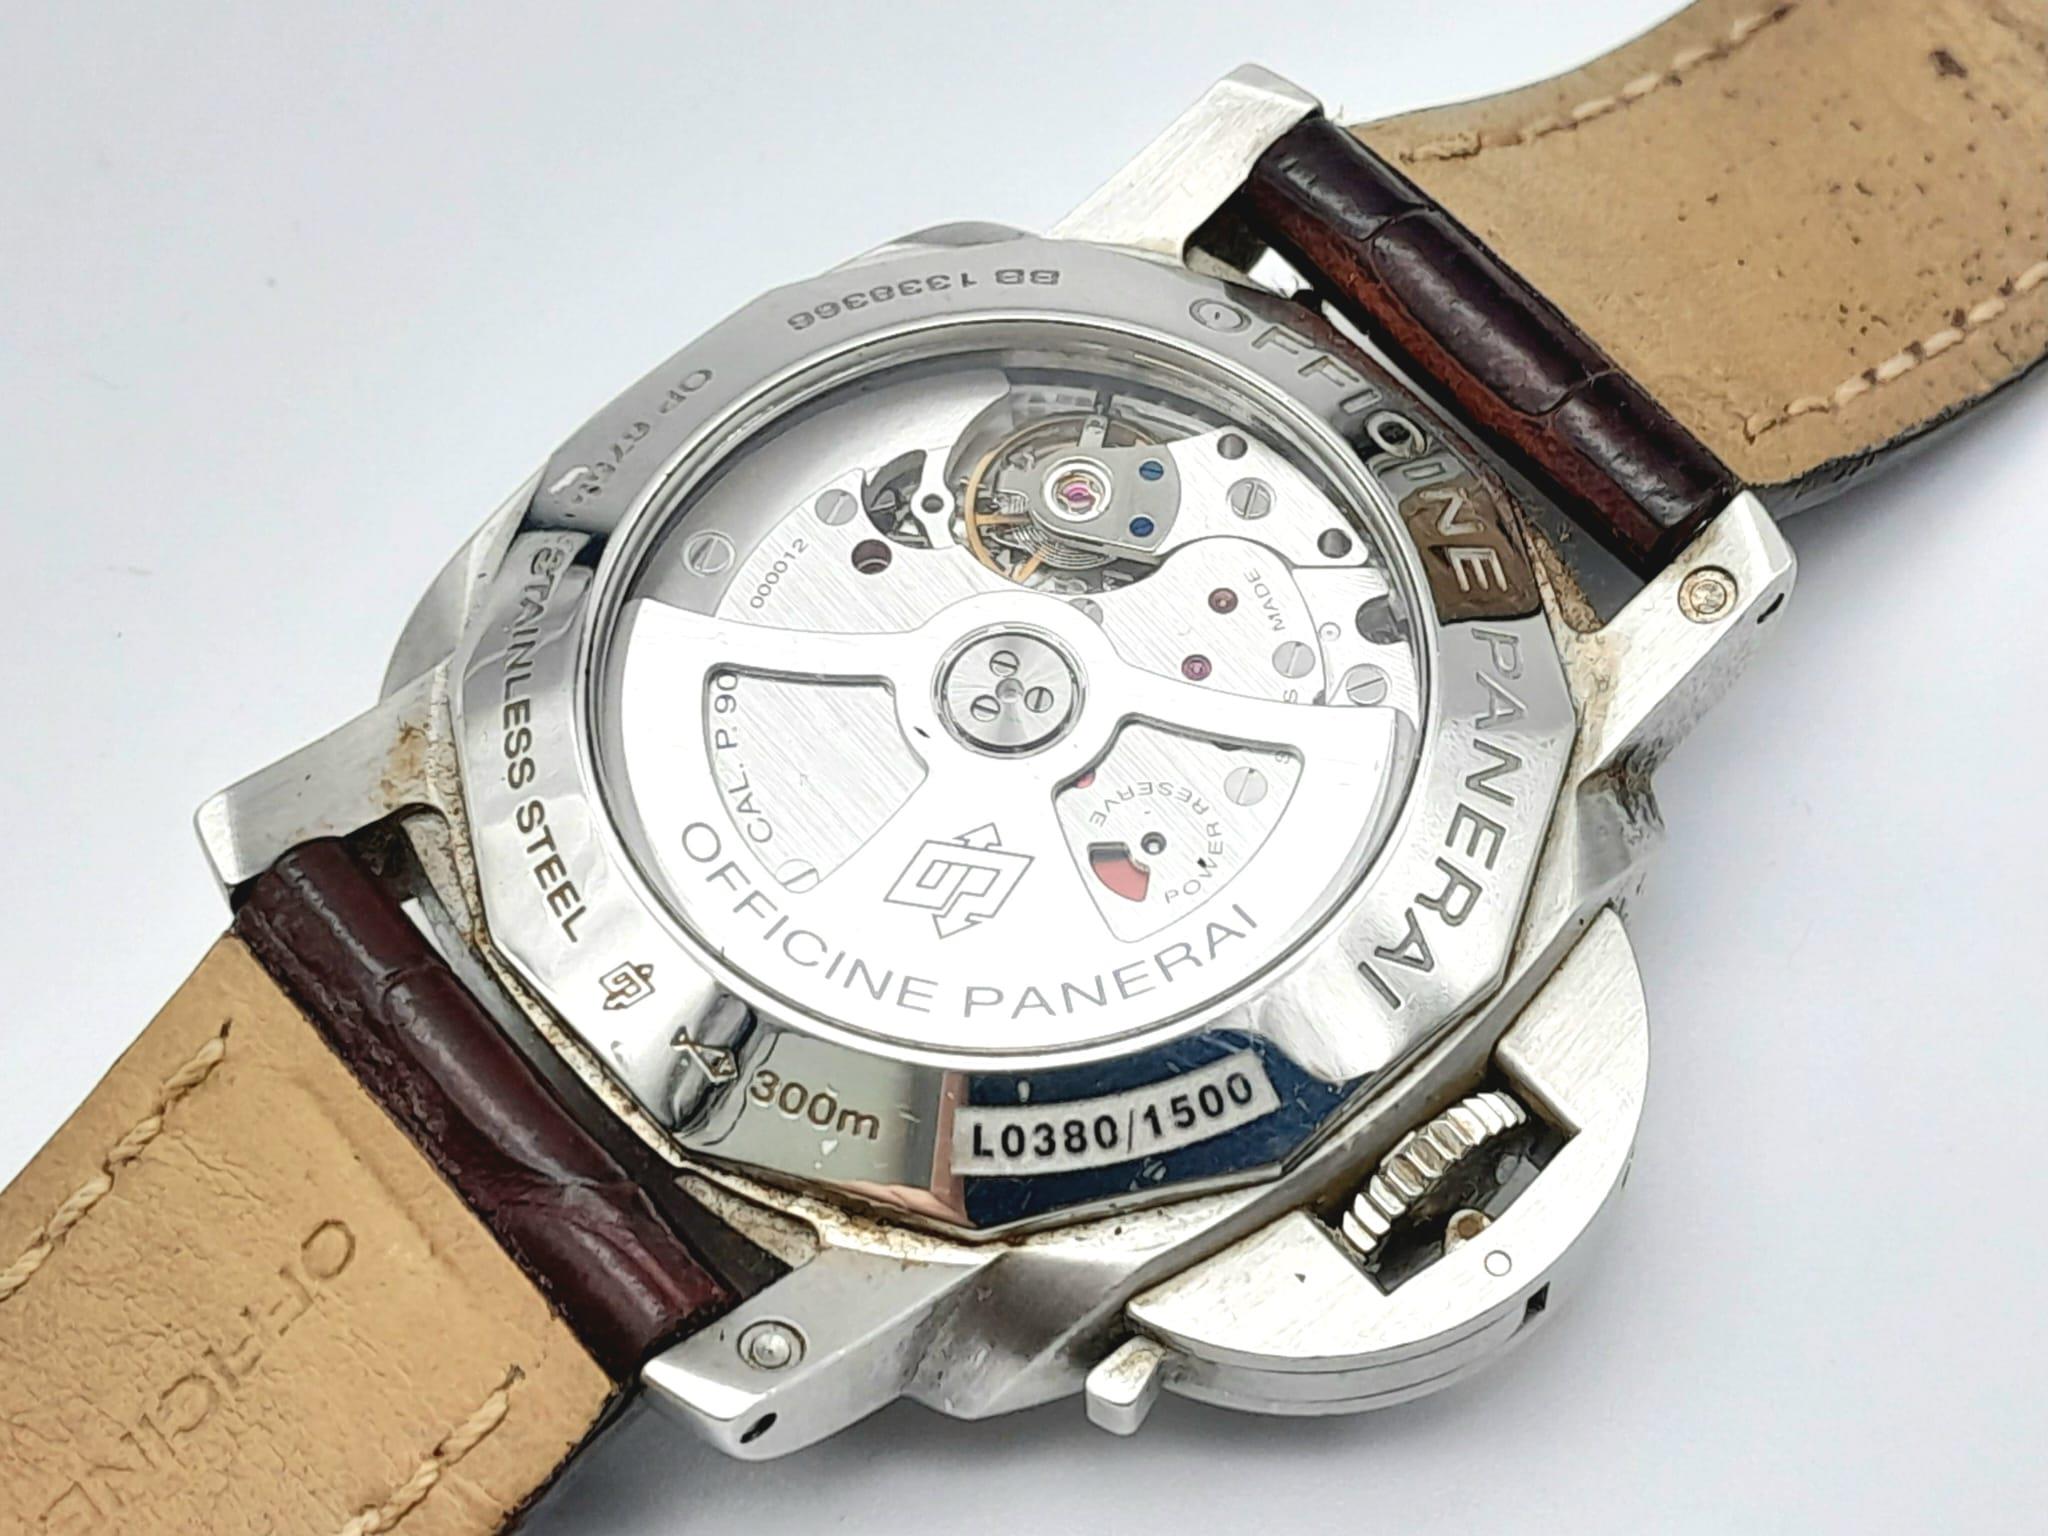 A "PANERAI LUMINOR GMT" WITH SKELETON BACK IN STAINLESS STEEL, A VERY SOUGHT AFTER PRESTIGE WATCH! - Image 11 of 11